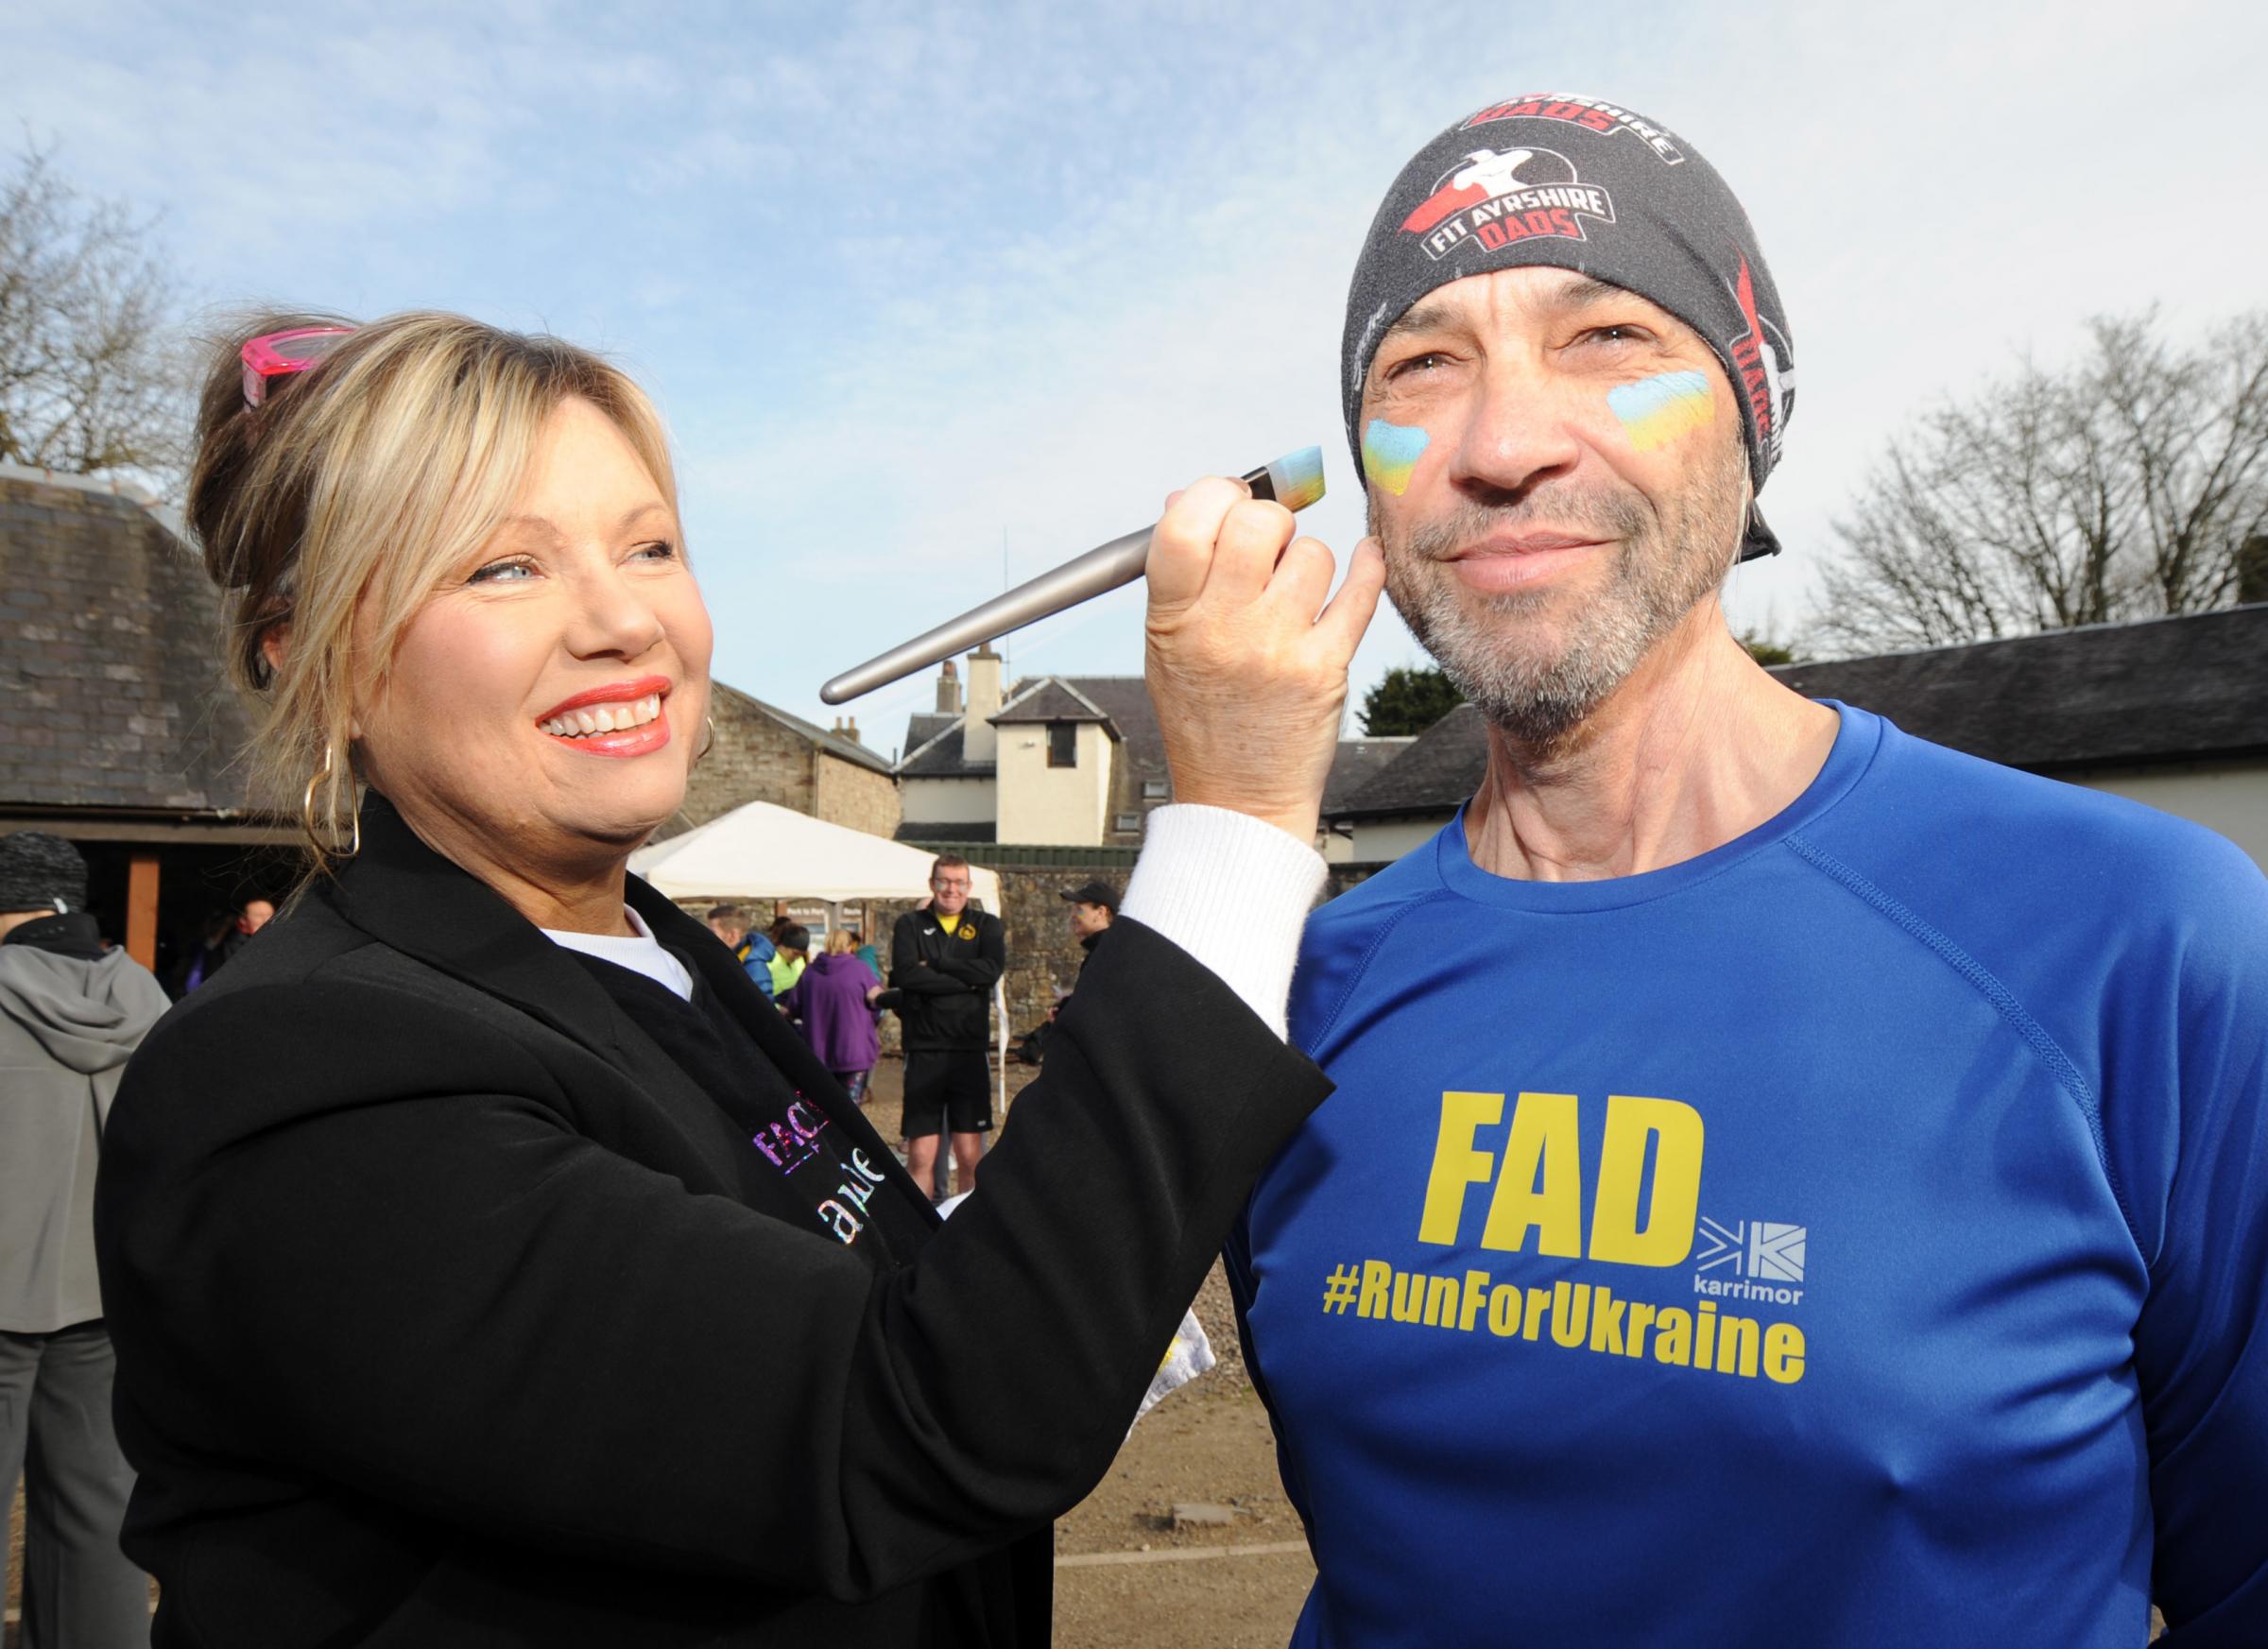 Fit Ayrshire Dads run for Ukraine